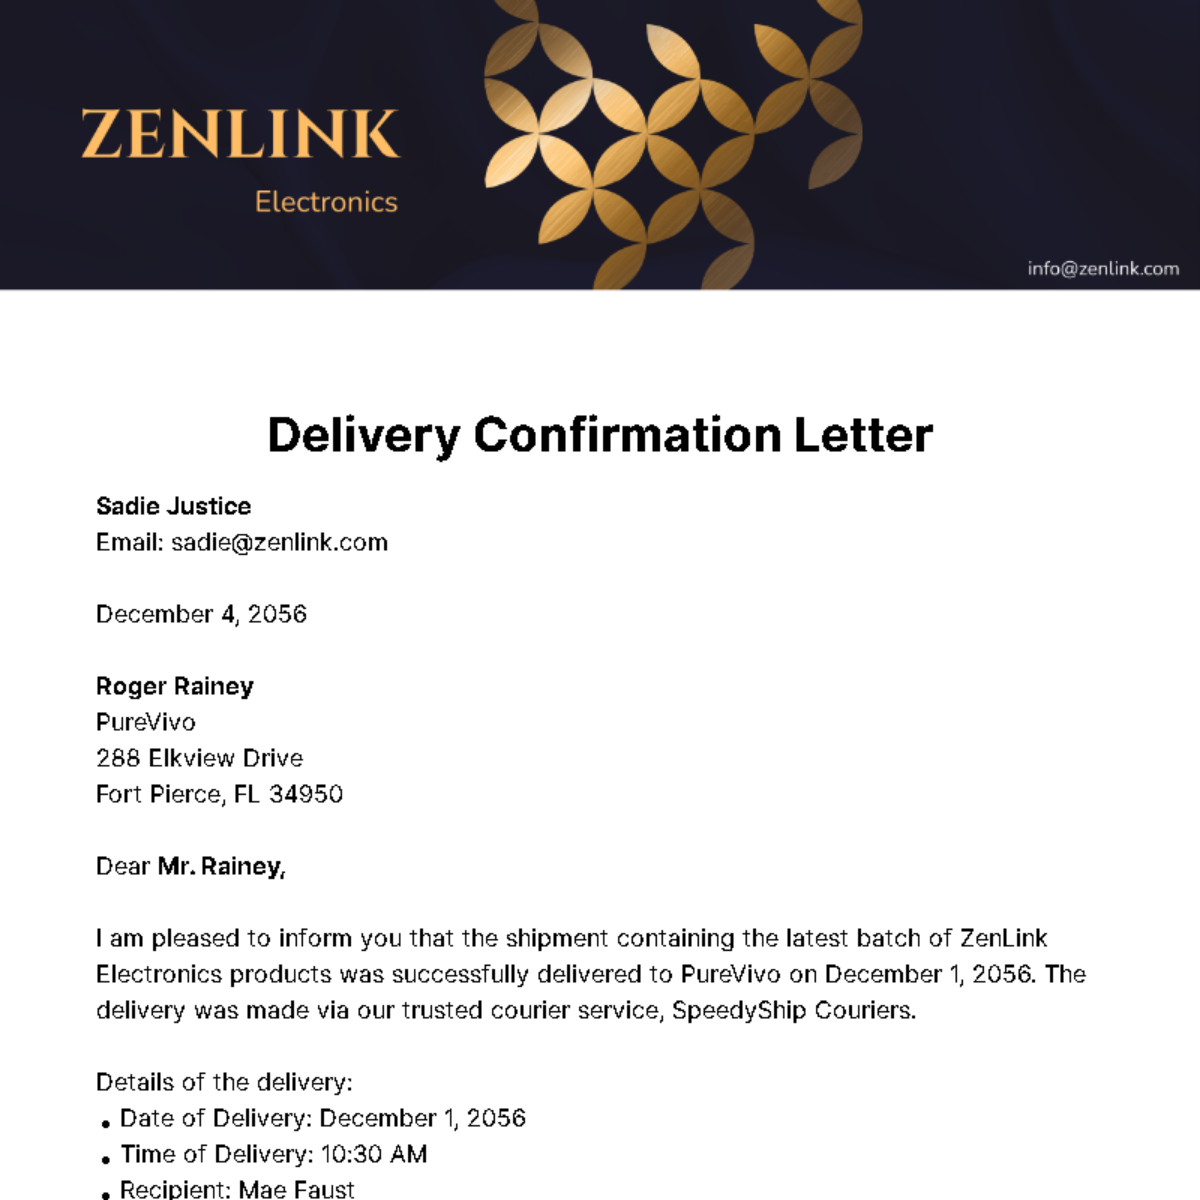 Delivery Confirmation Letter Template